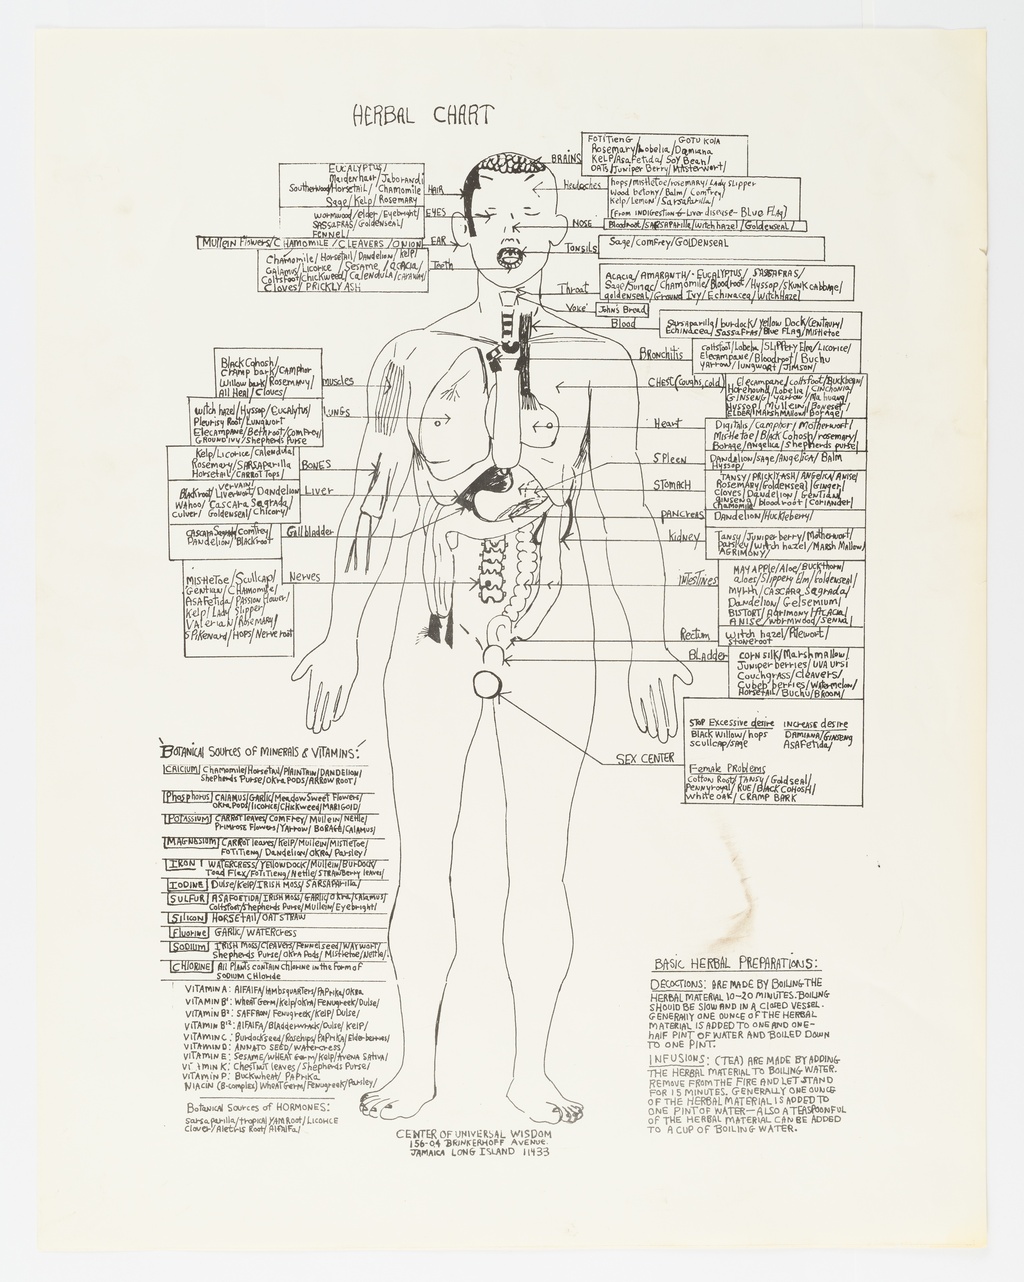 An anatomical illustration of a human figure titled "Herbal Chart." Arrows point to parts of the figure and label them with botanic names and descriptions.&nbsp;